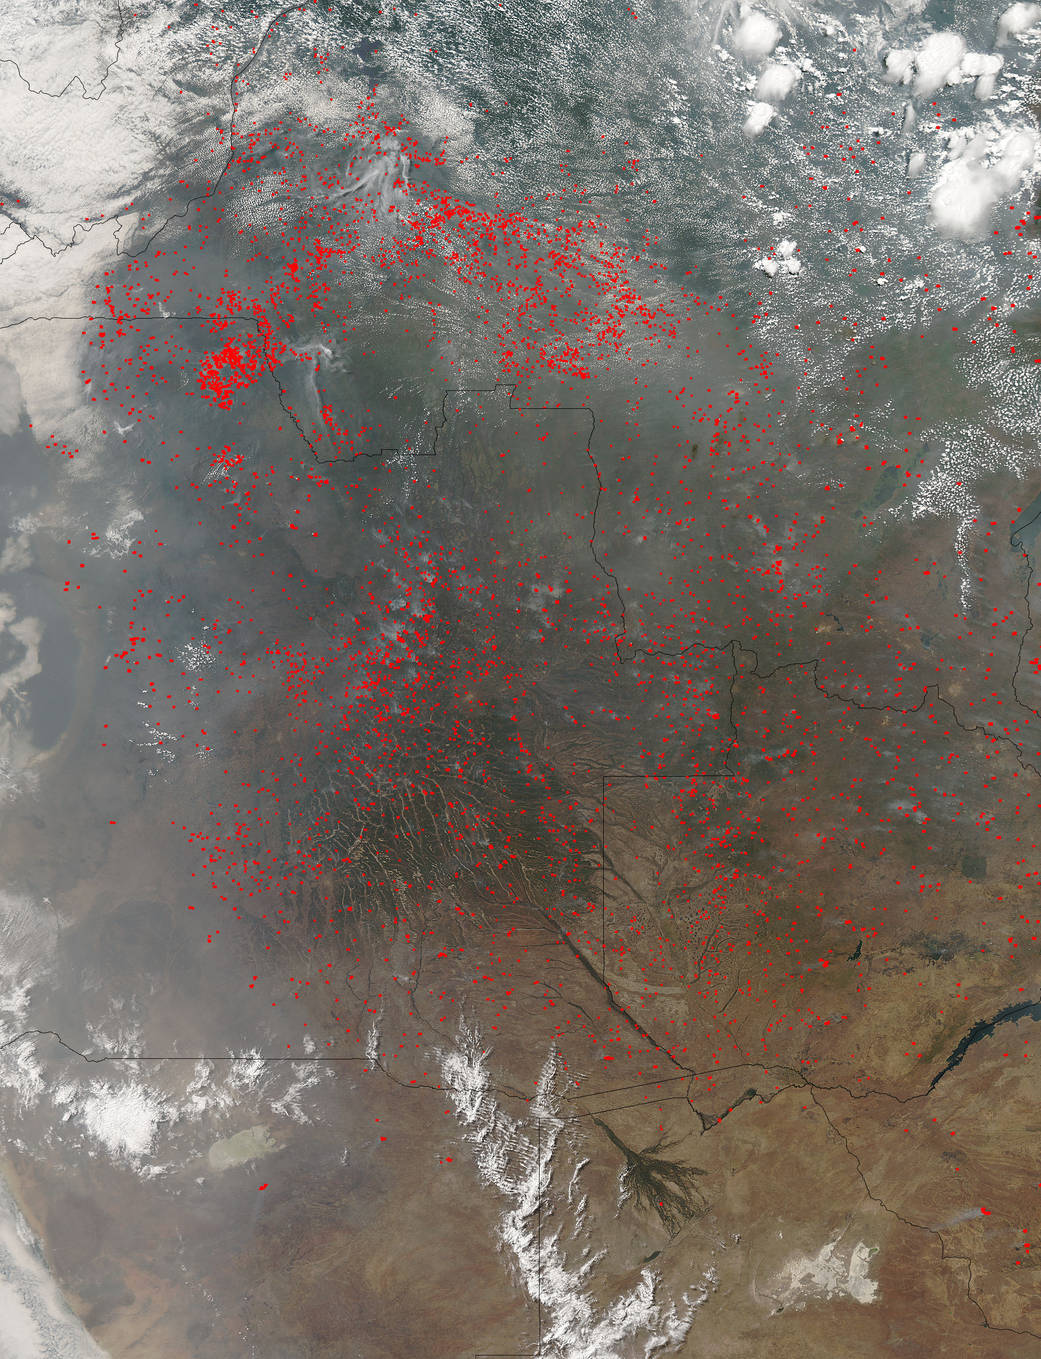 Agricultural fires in Africa